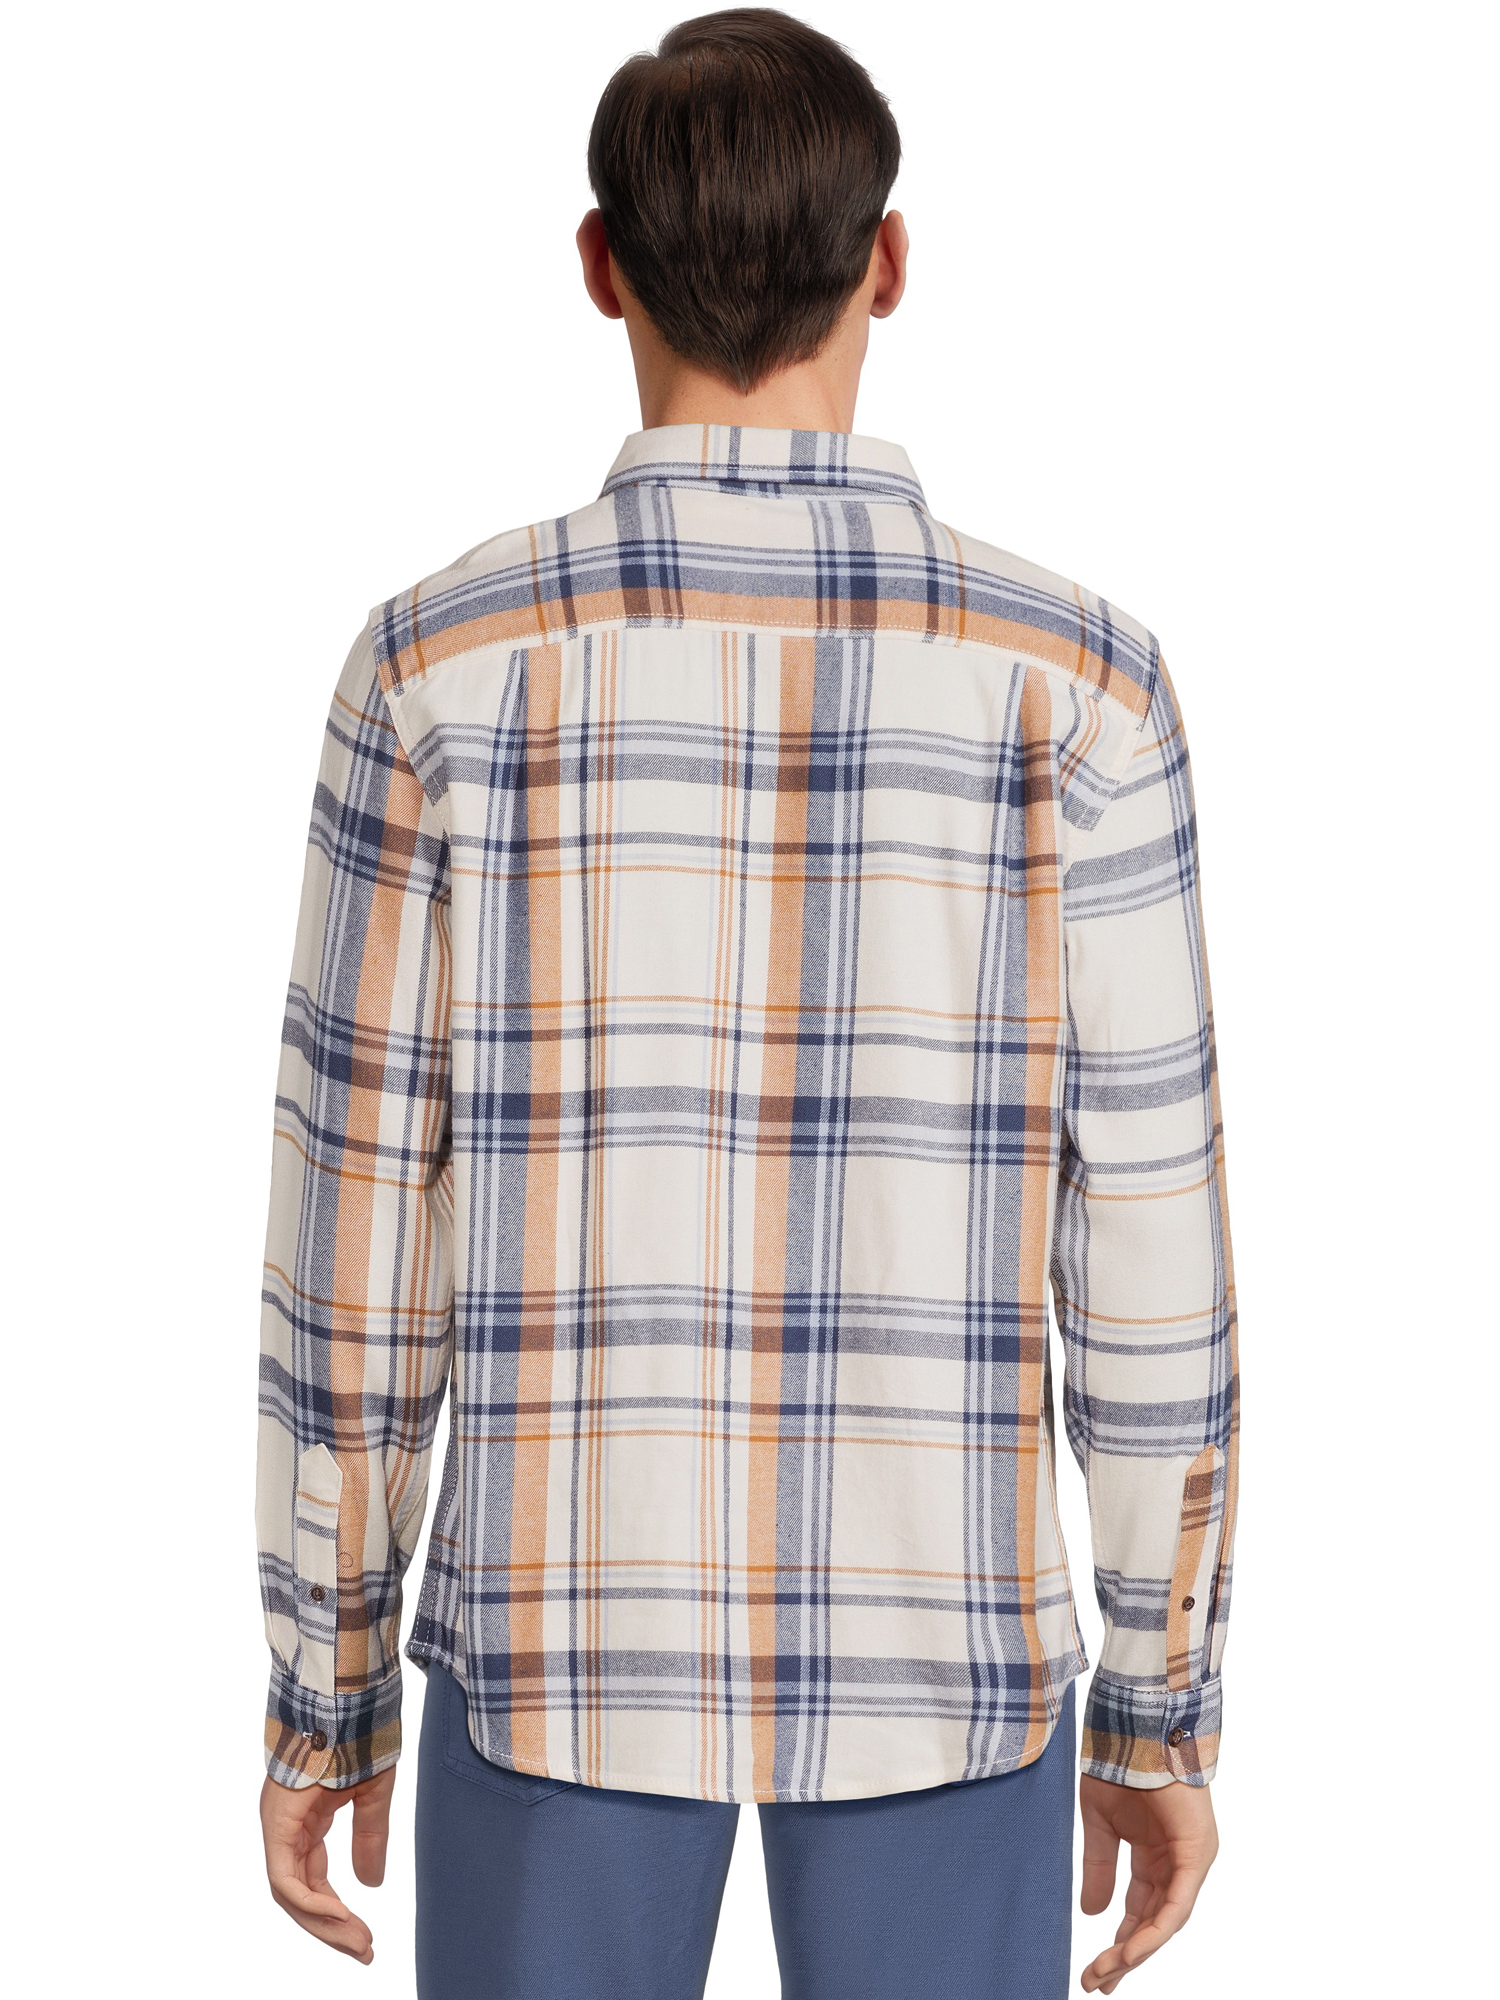 George Men's Long Sleeve Flannel Shirts, 2-Pack, Sizes S-2XL - image 3 of 5